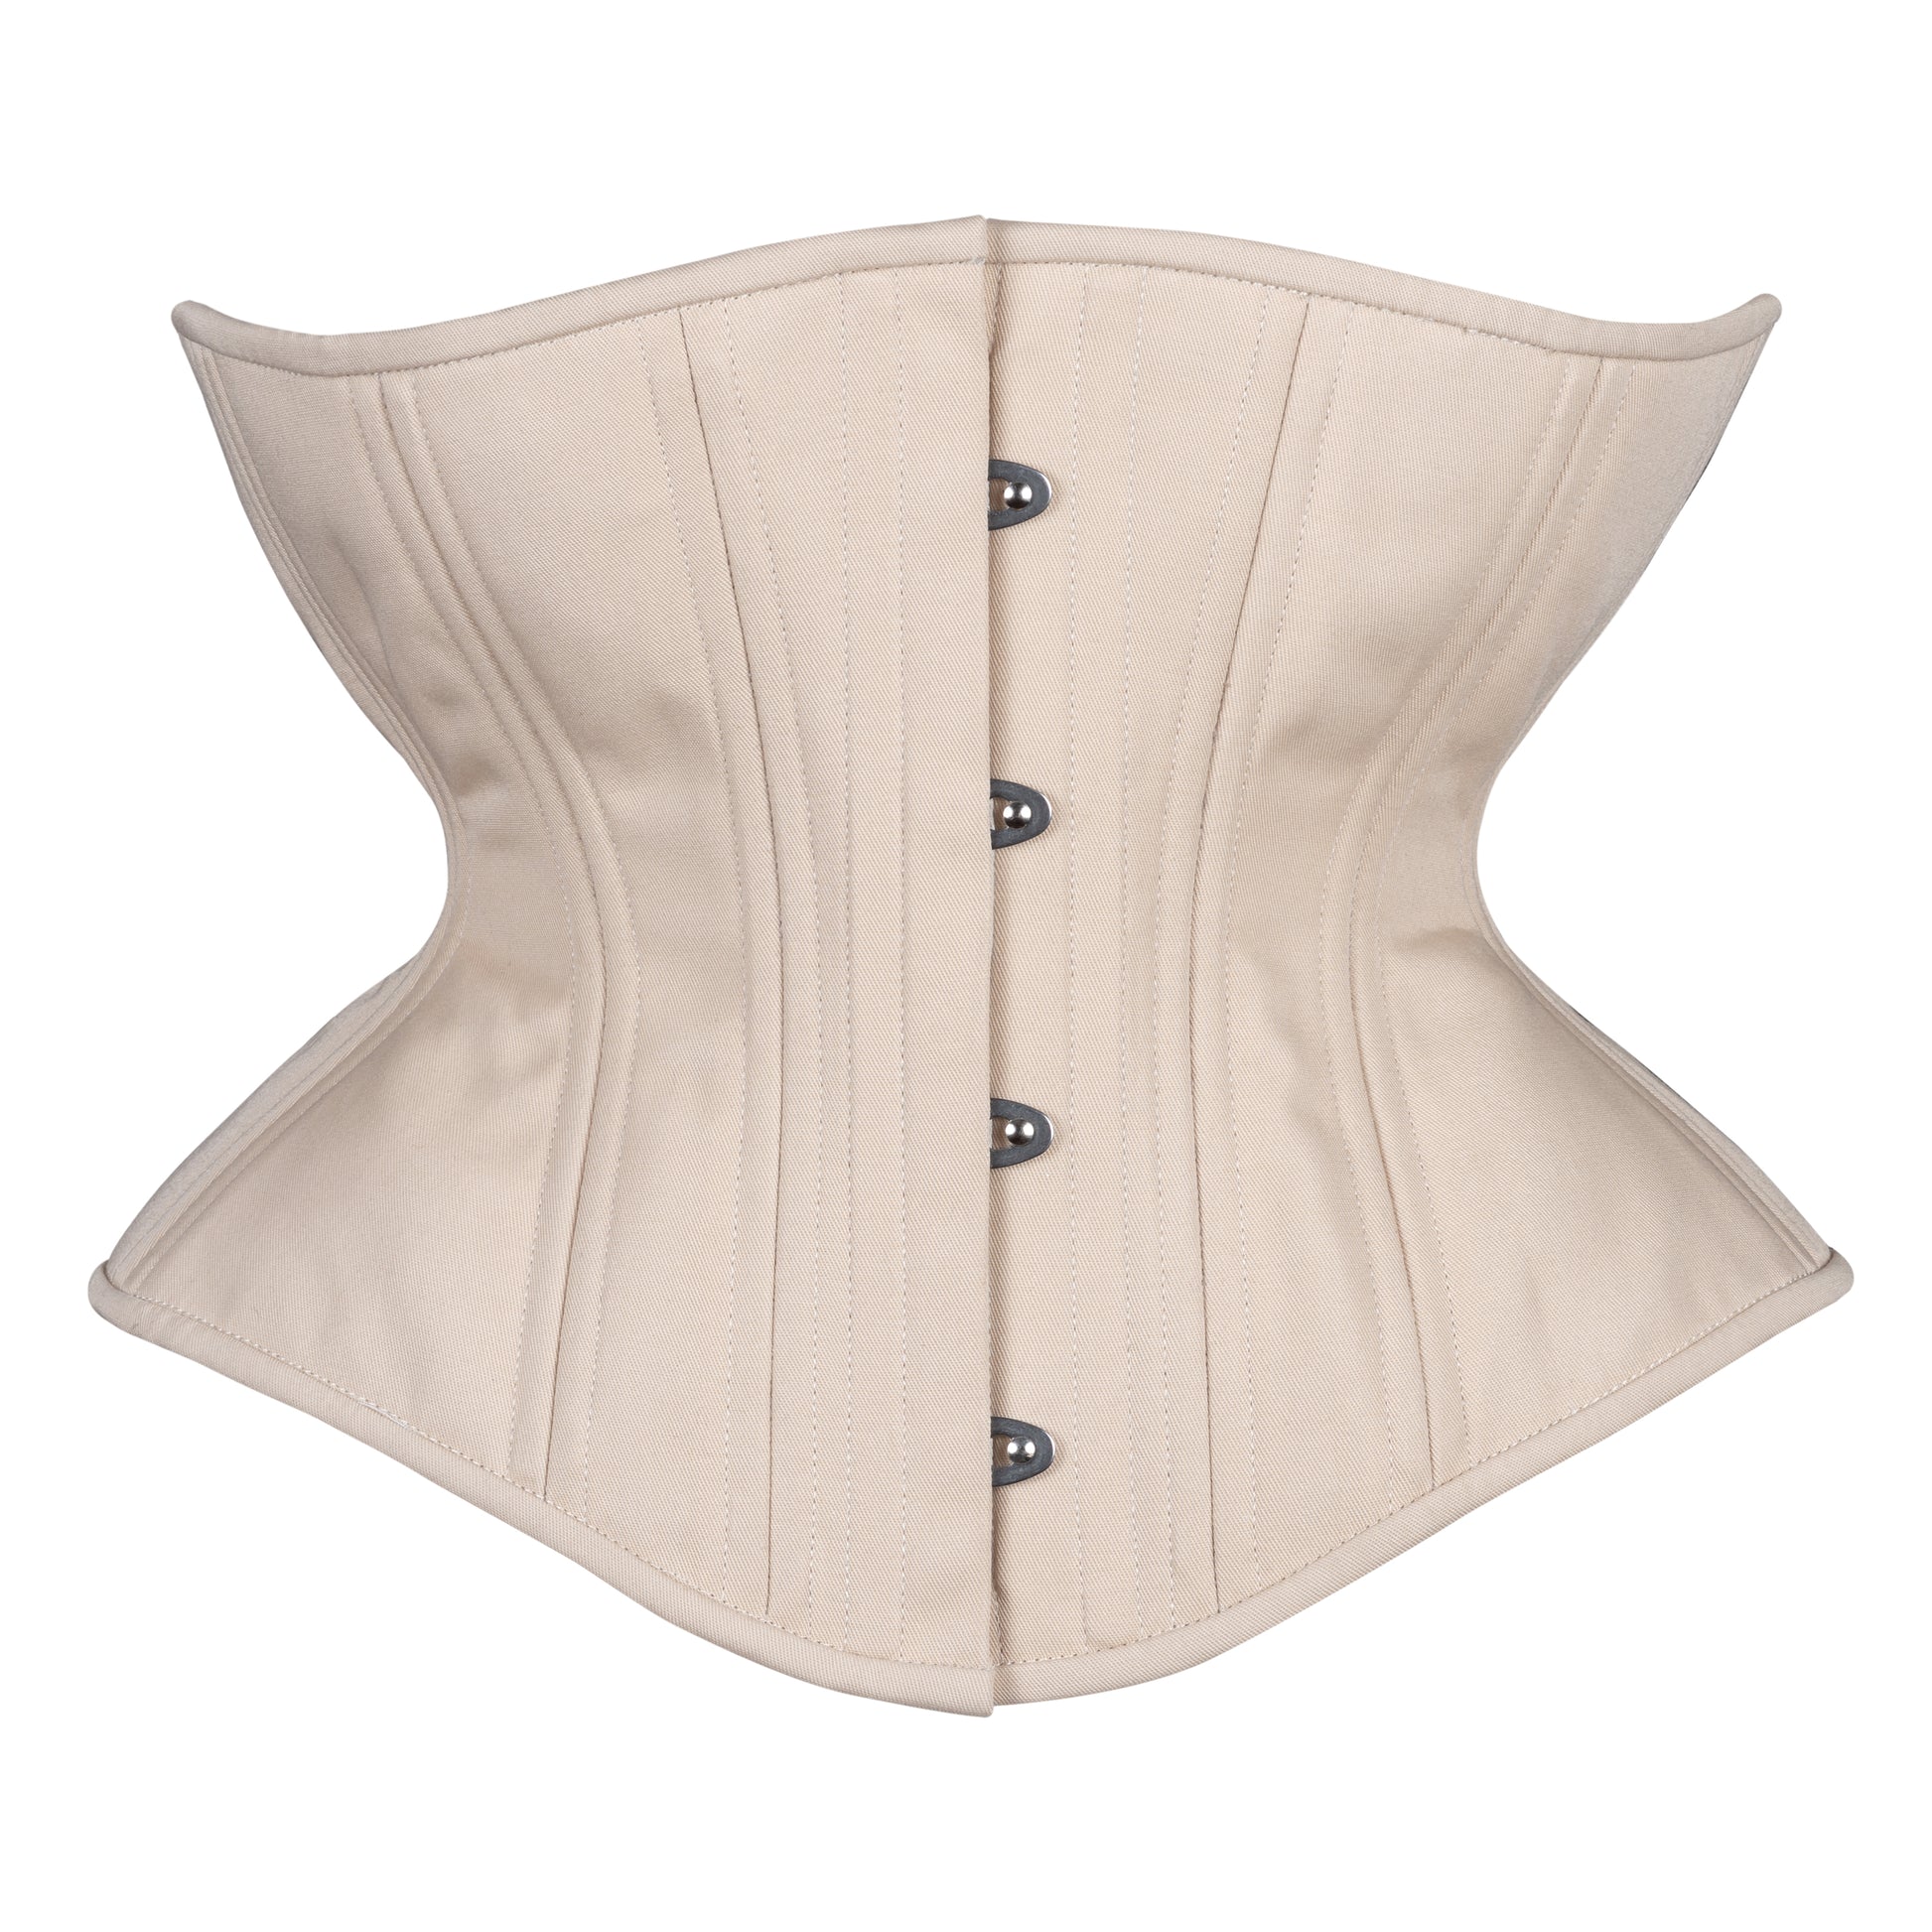 Corset Reviews – Lucy's Corsetry